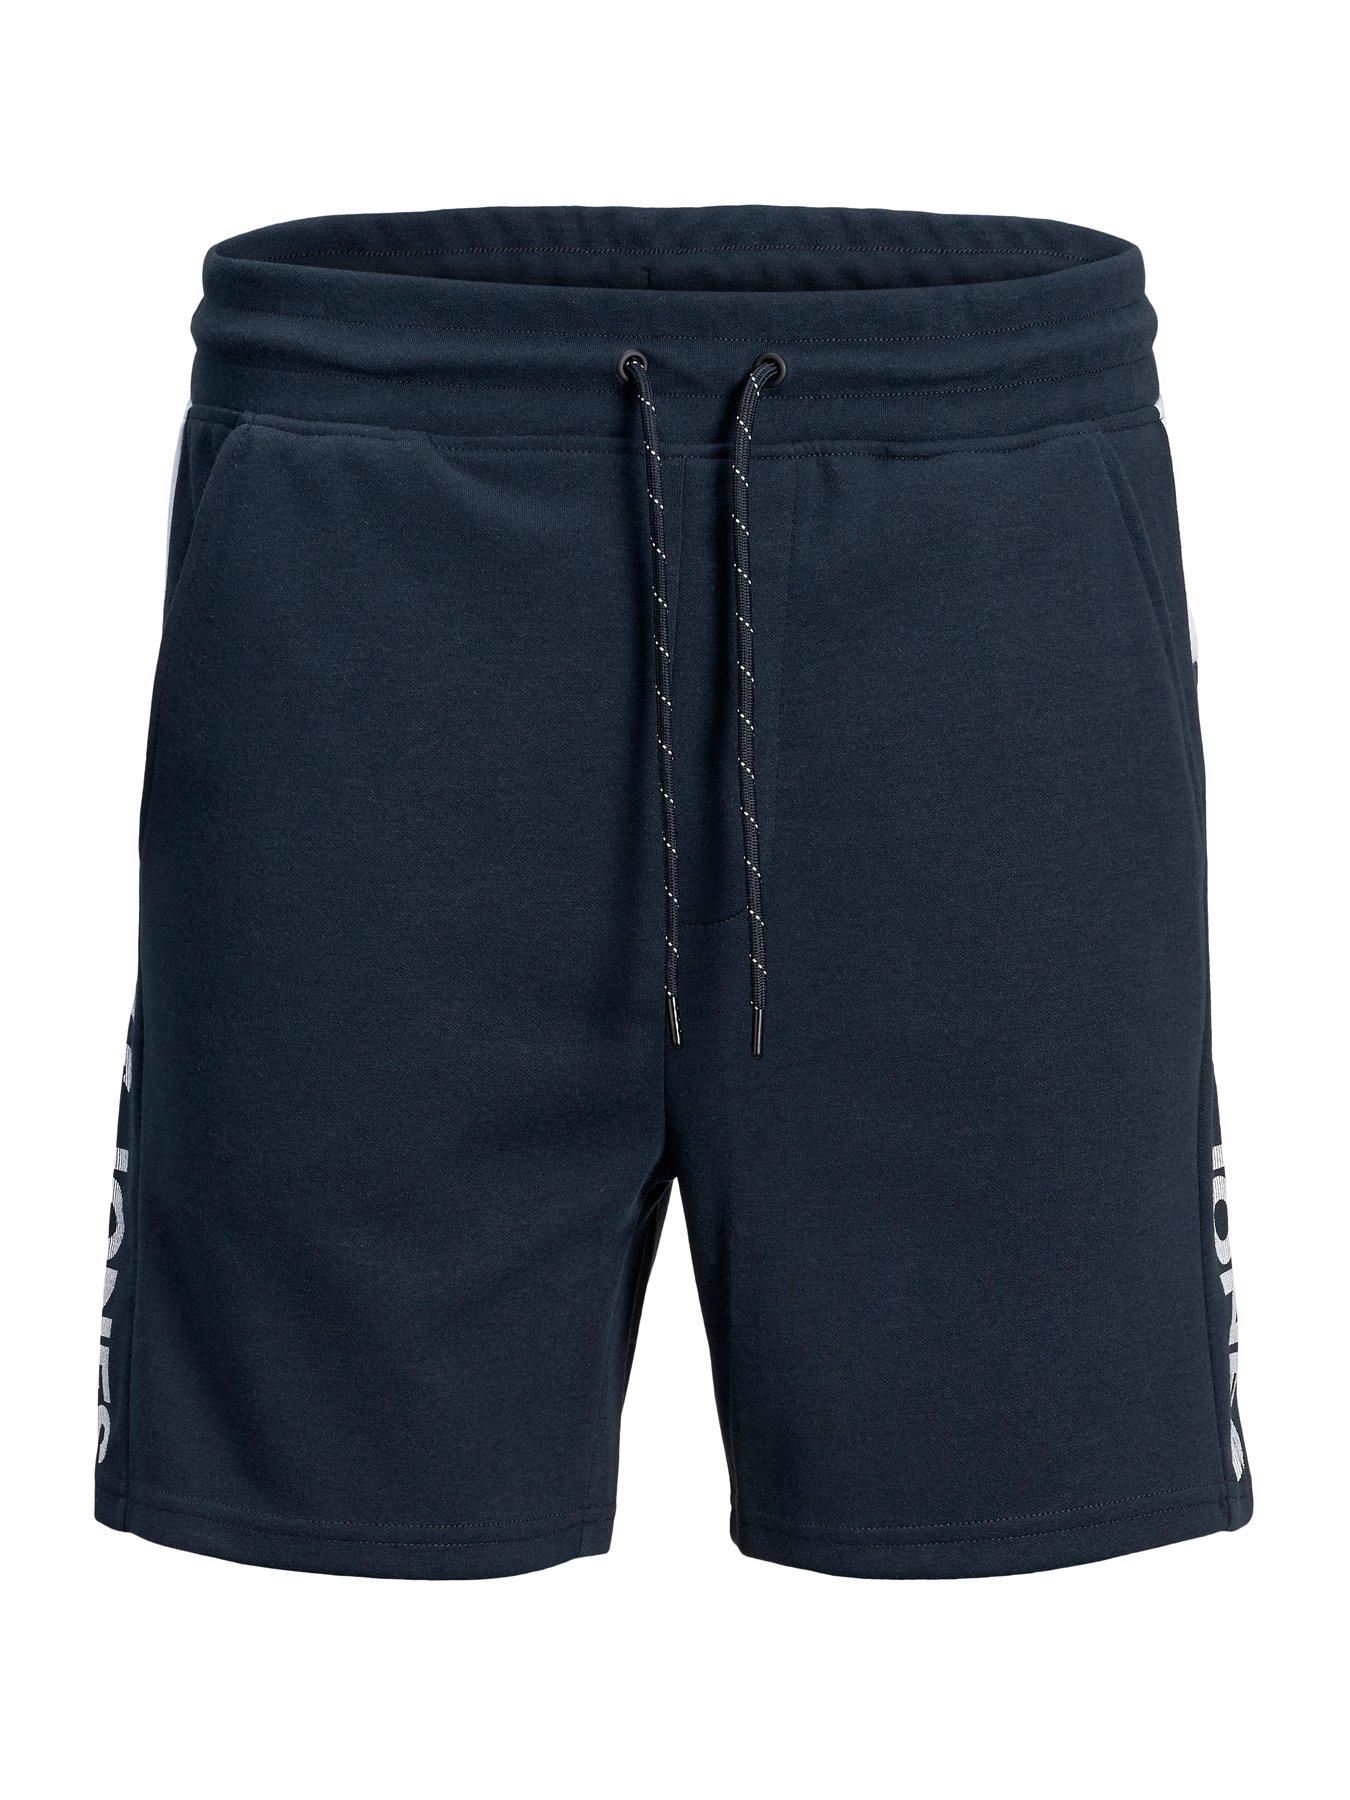 Life is Better When You Dance Mens Athletic Classic Summer Boardshorts with Pockets 